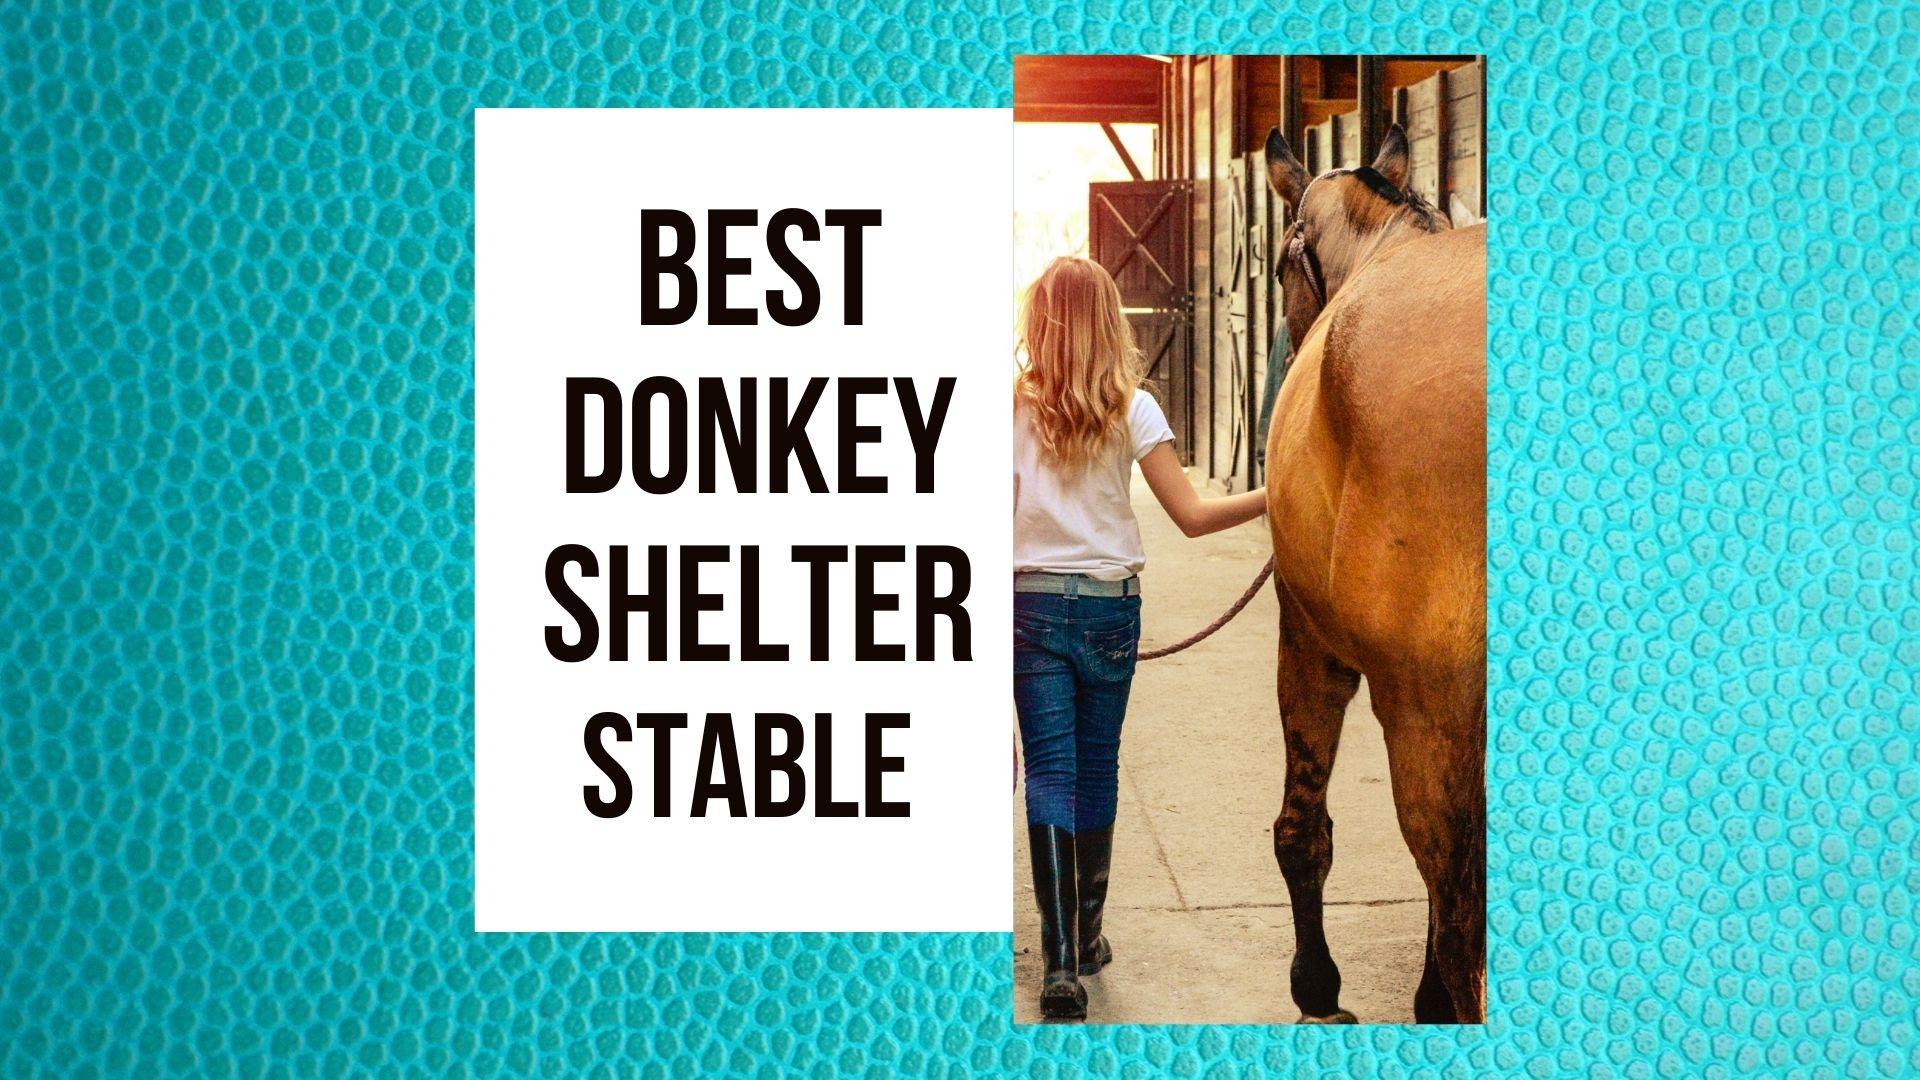 Best Donkey Stable and shelter